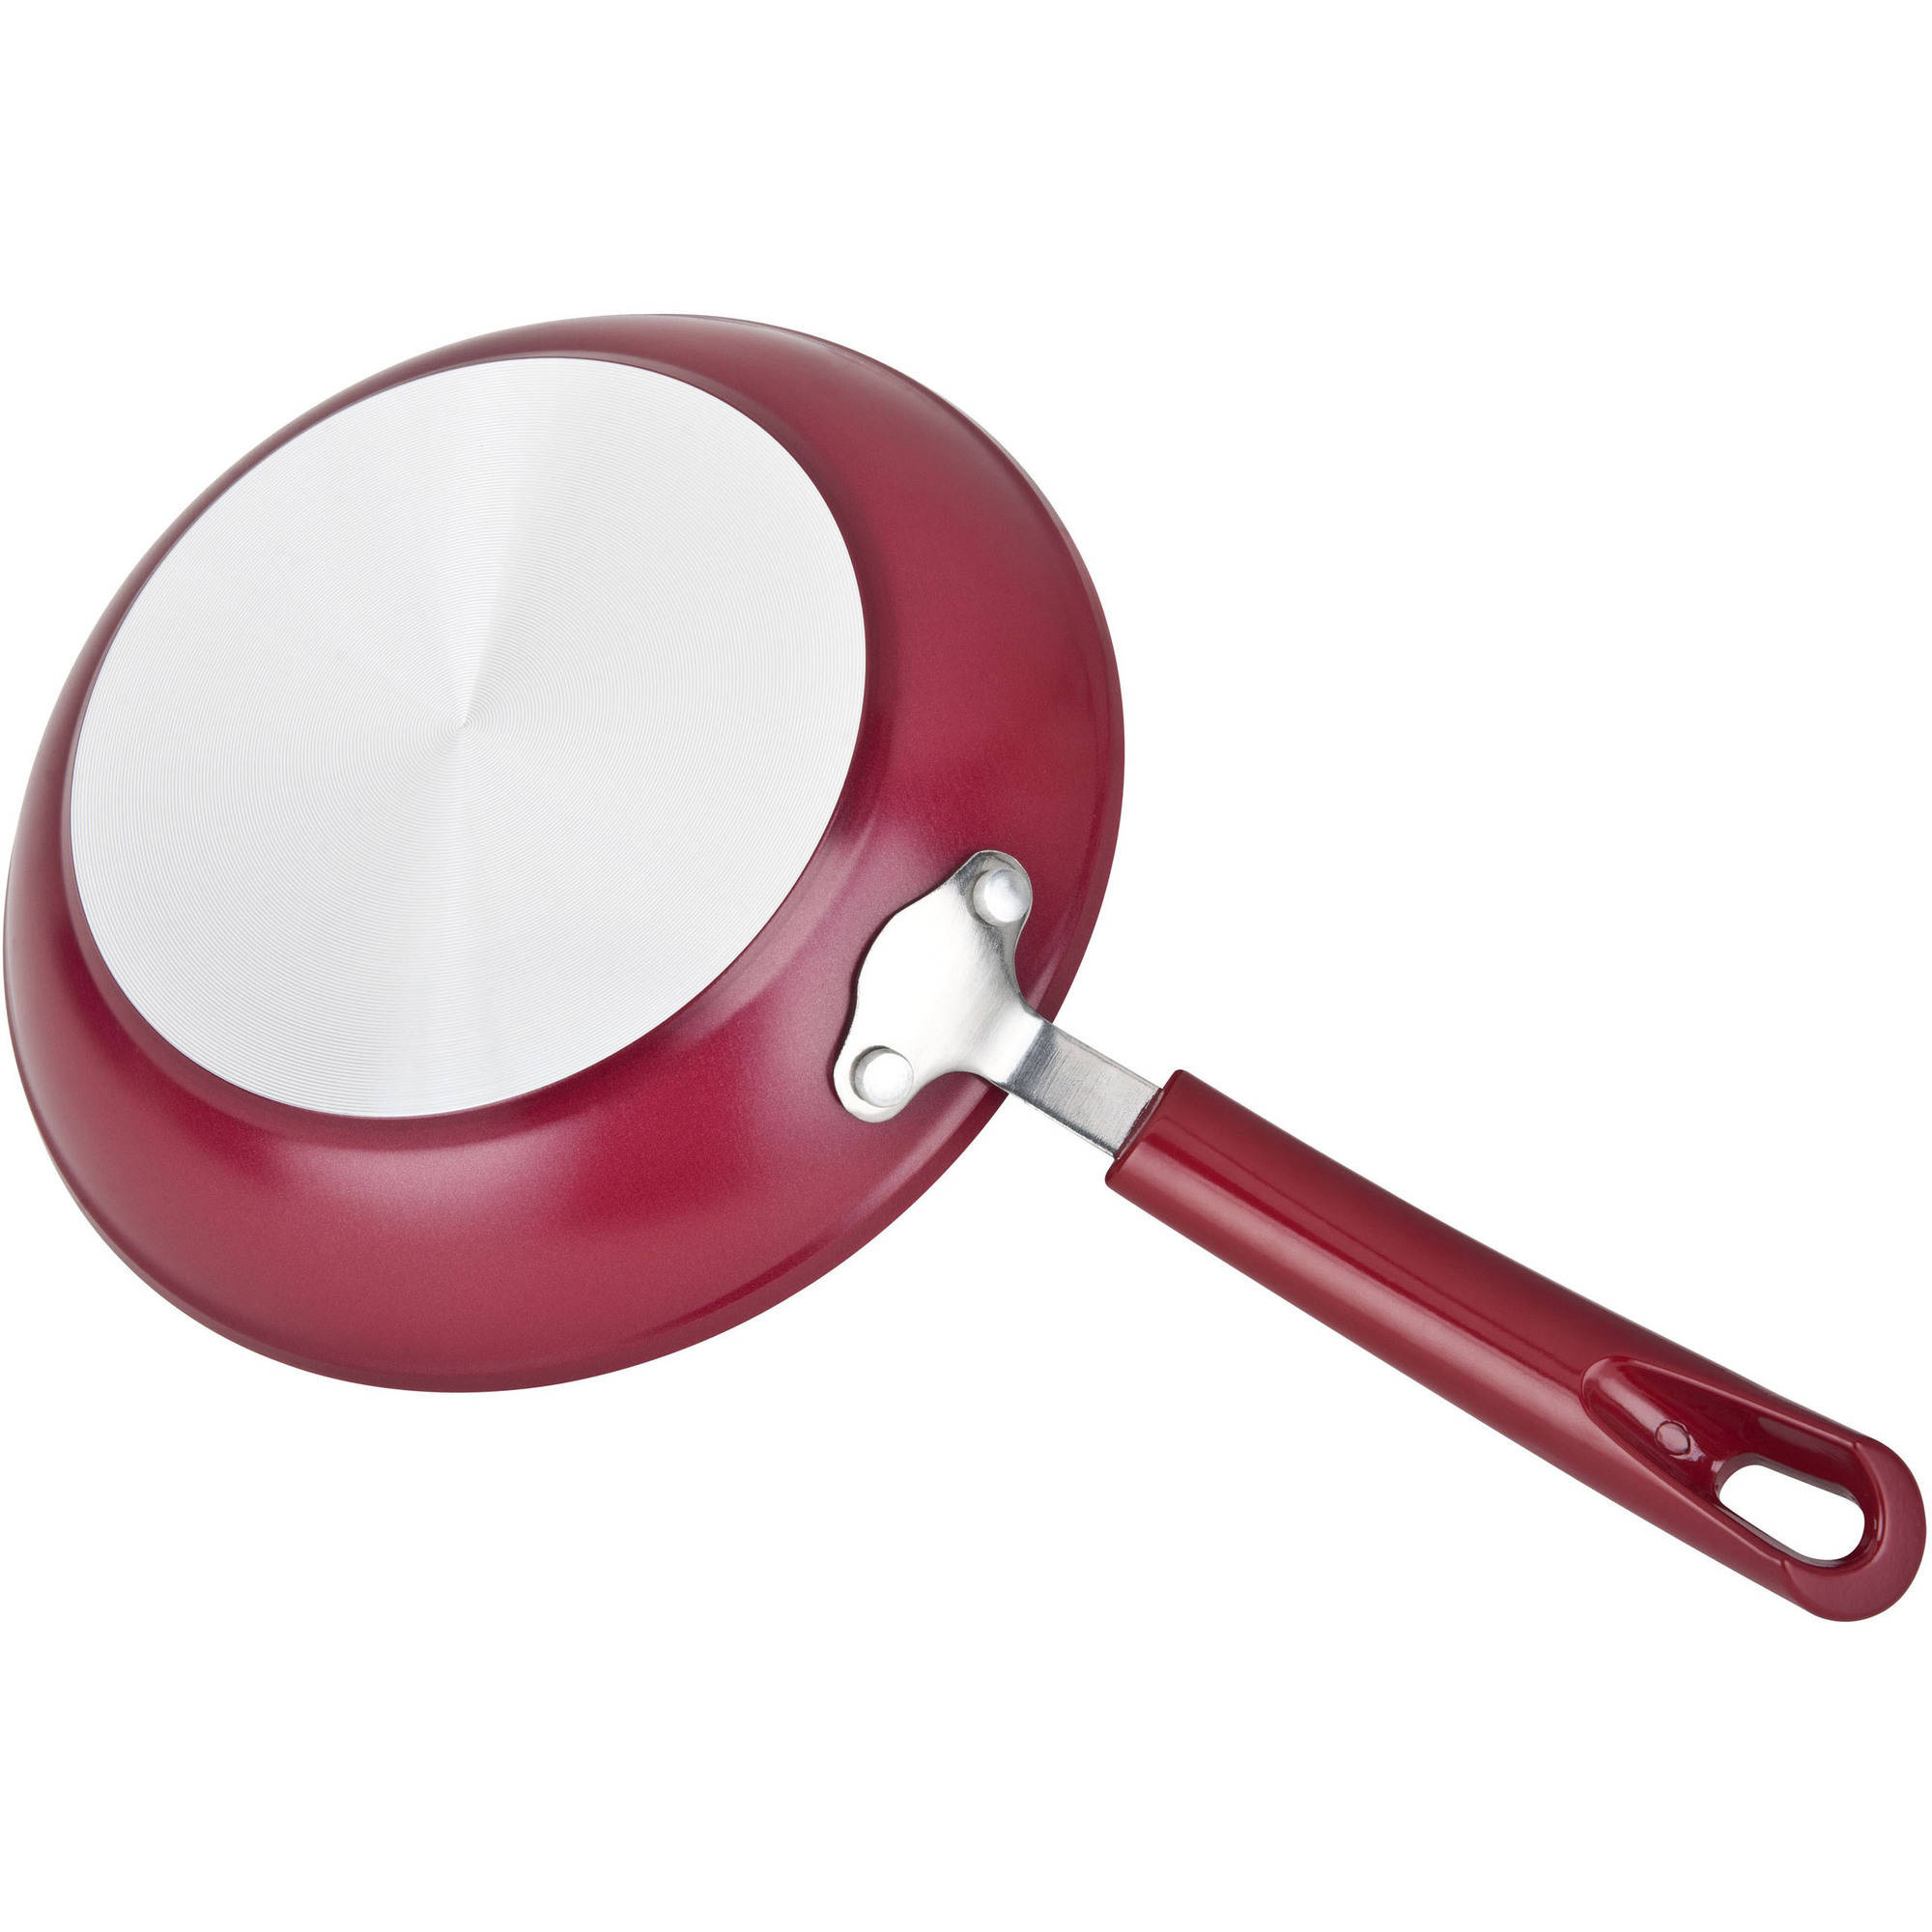 Mainstays 3-Piece Forged Skillet Set, Red - image 2 of 4